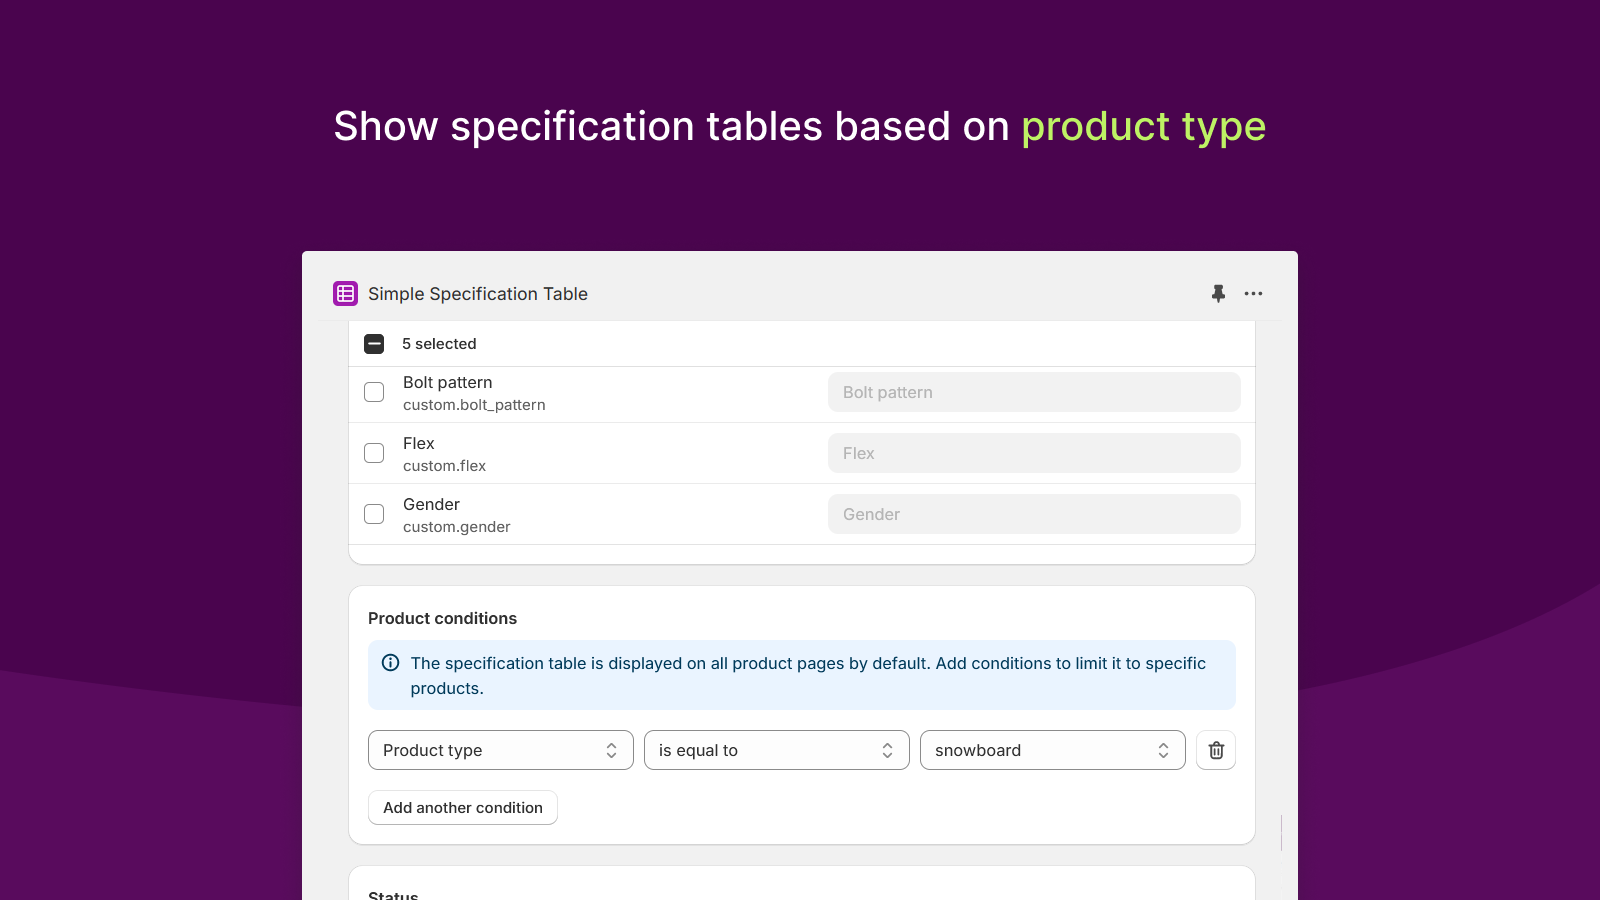 Show specification tables based on product type